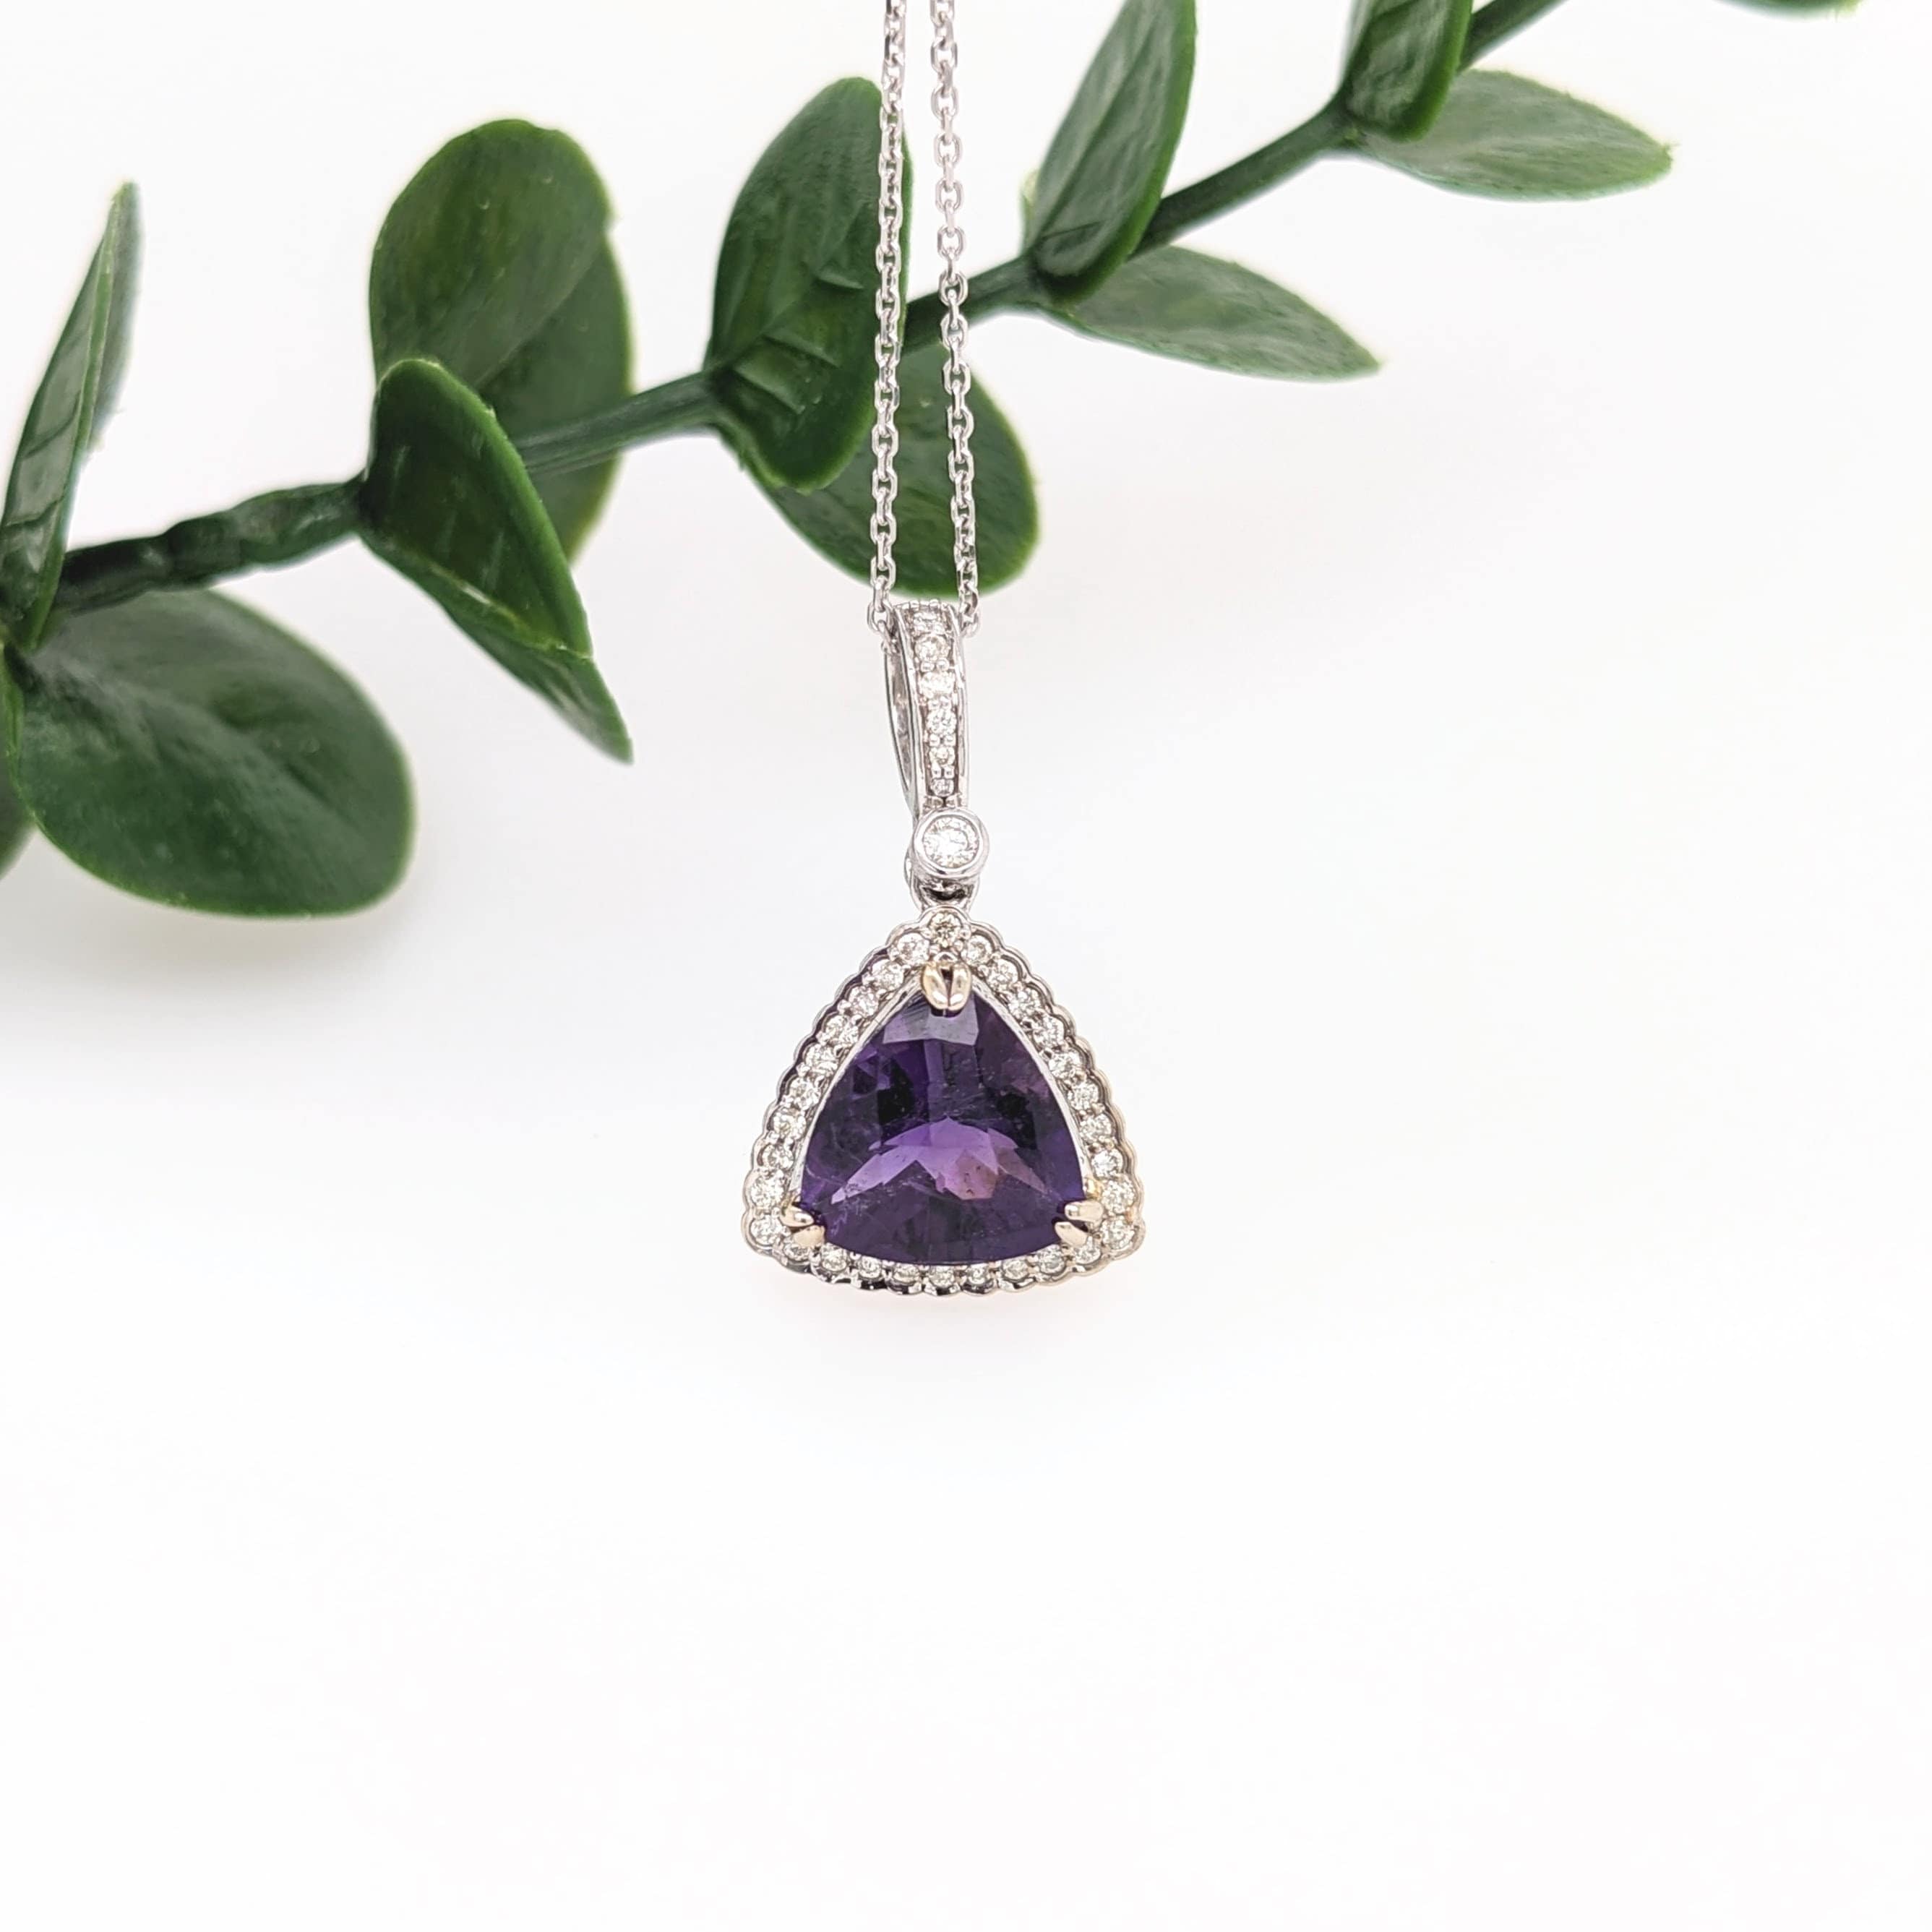 Pendants-Classy Purple Amethyst Pendant in Solid 14k White Gold with Natural Diamond Accents | Trillion 9mm | Diamond Bail | Gold Chain Option - NNJGemstones